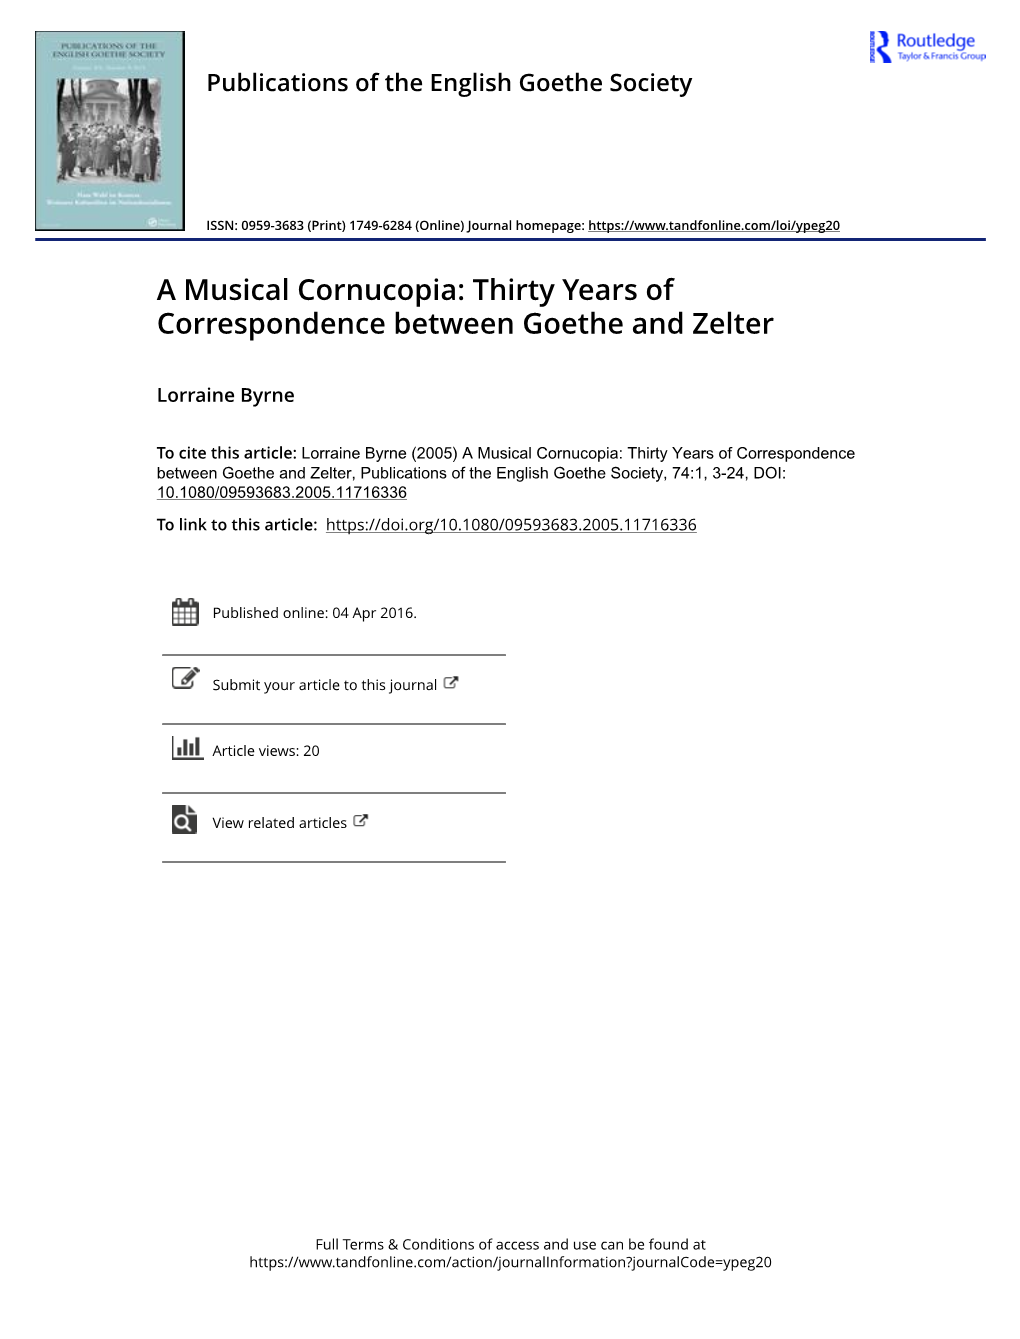 A Musical Cornucopia: Thirty Years of Correspondence Between Goethe and Zelter